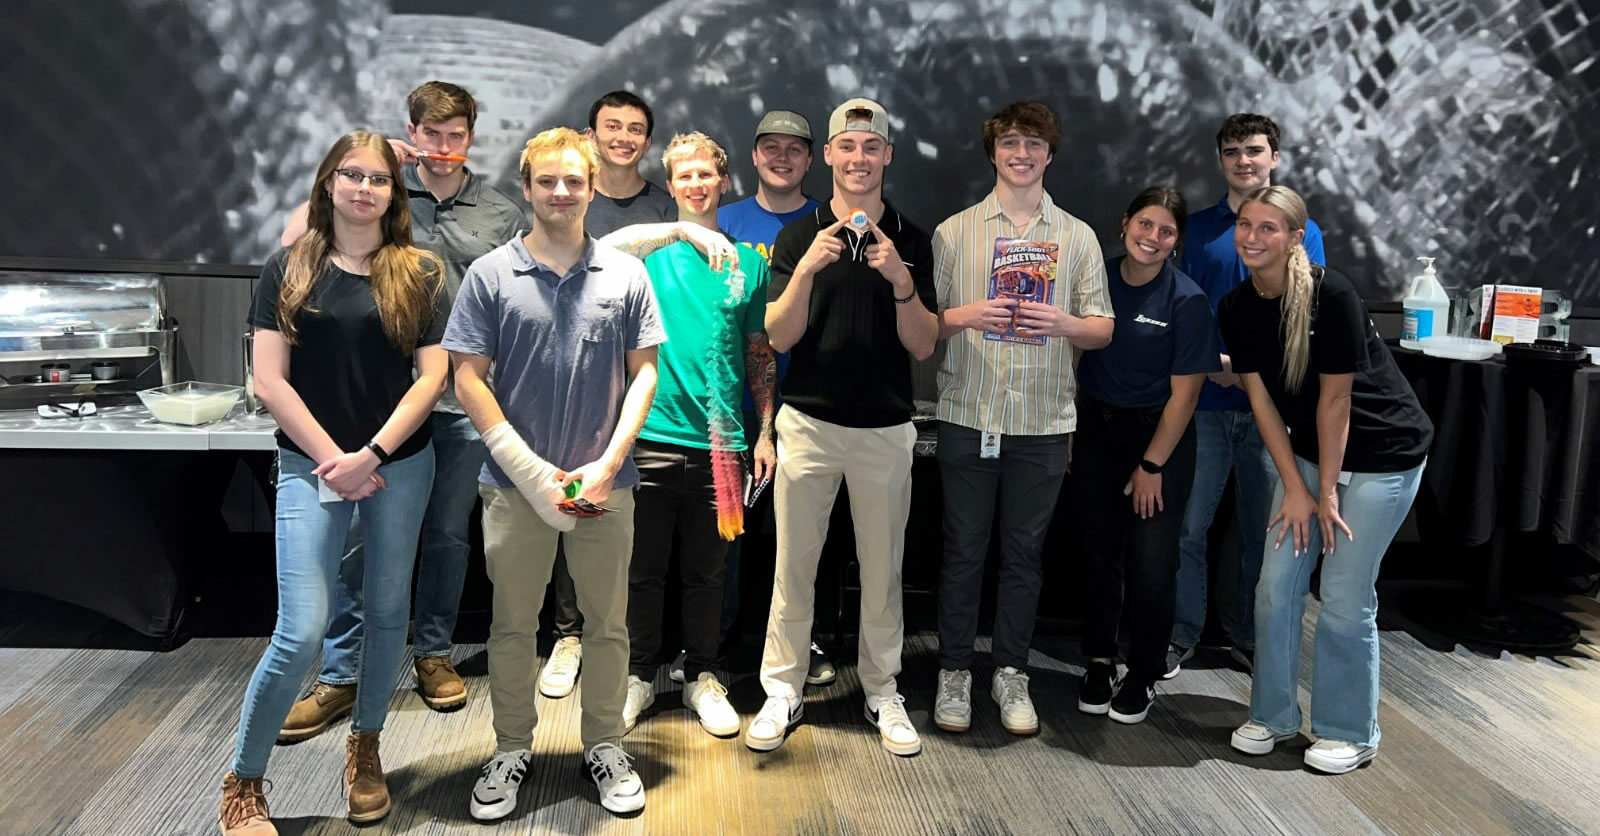 Omaha interns take group outing to Dave and Buster’s